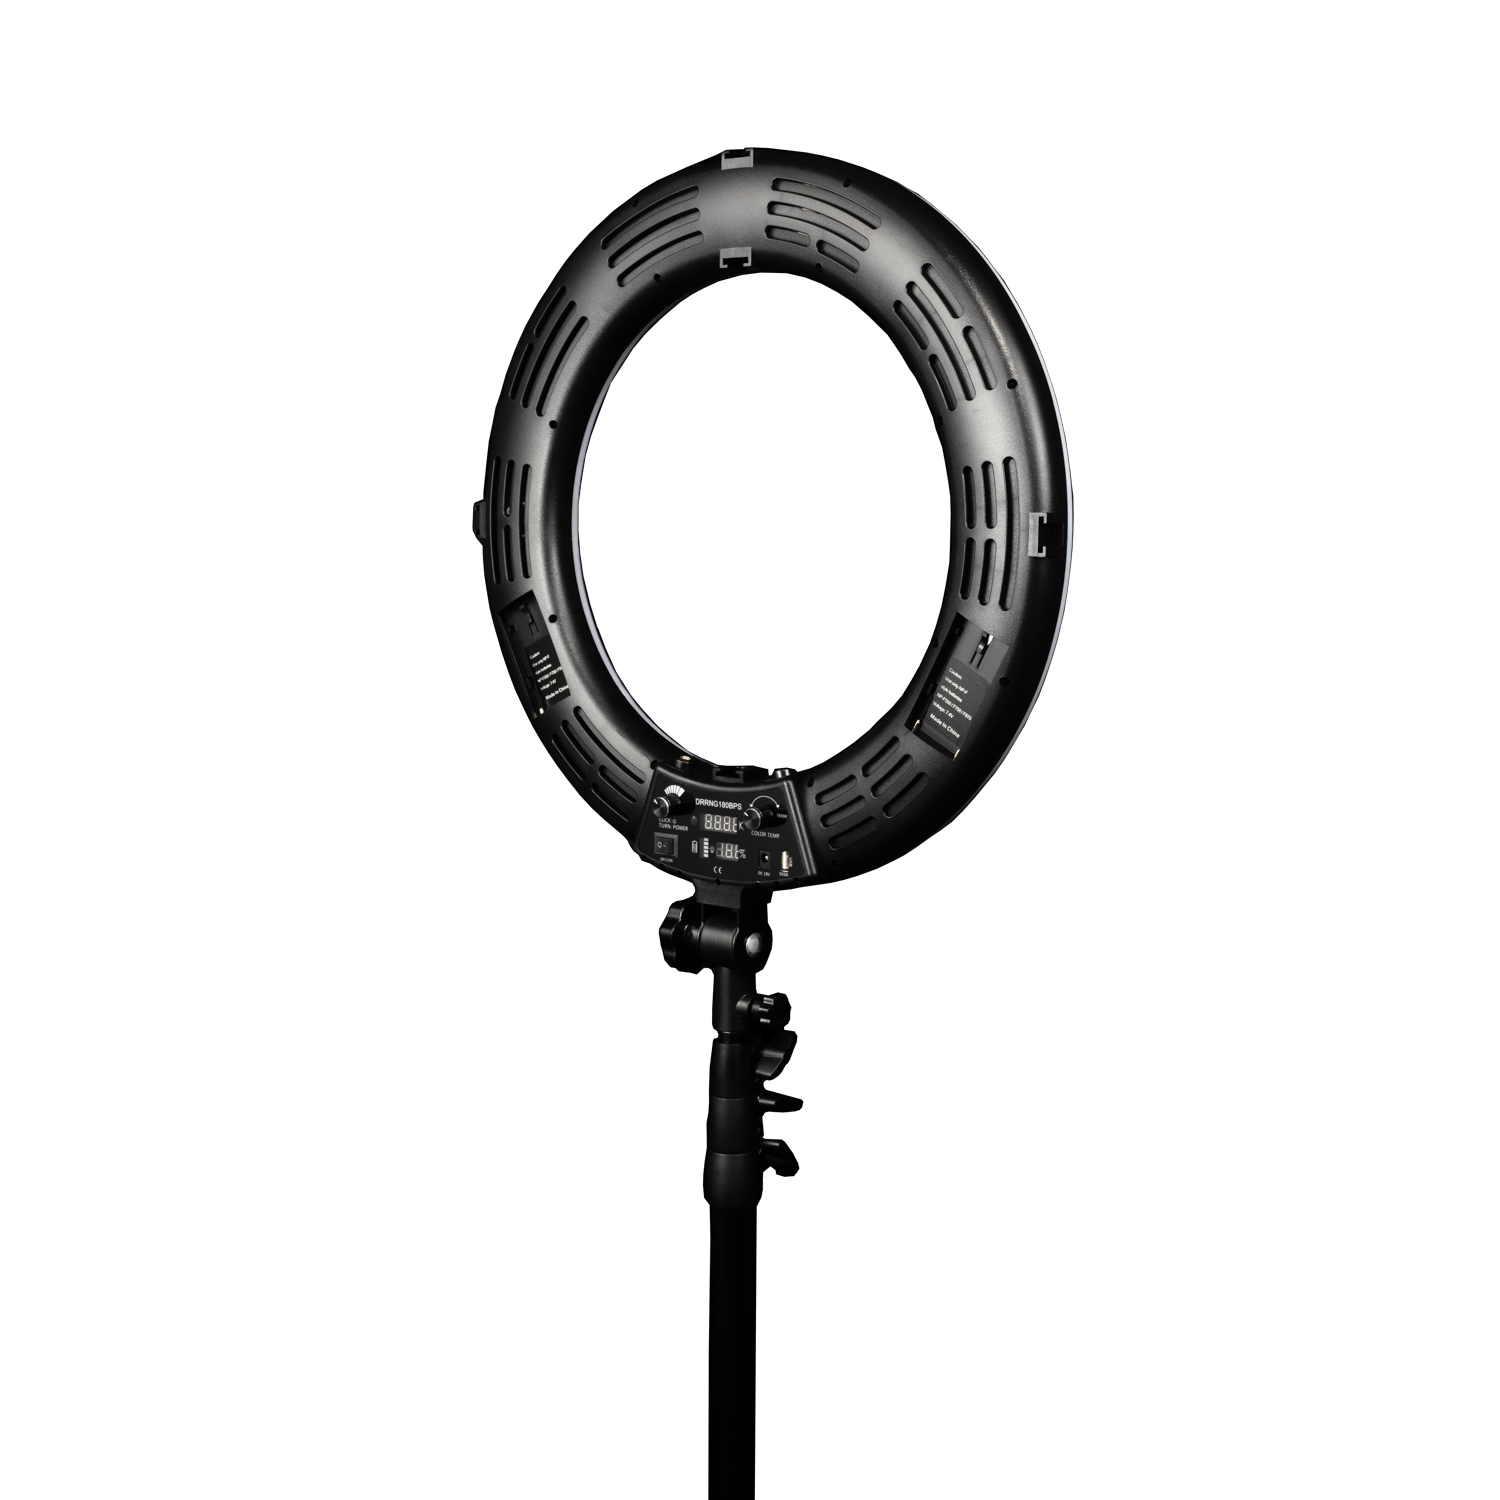 LED180 Halo Plus Series Ring Light Kit with Stand (45cm)